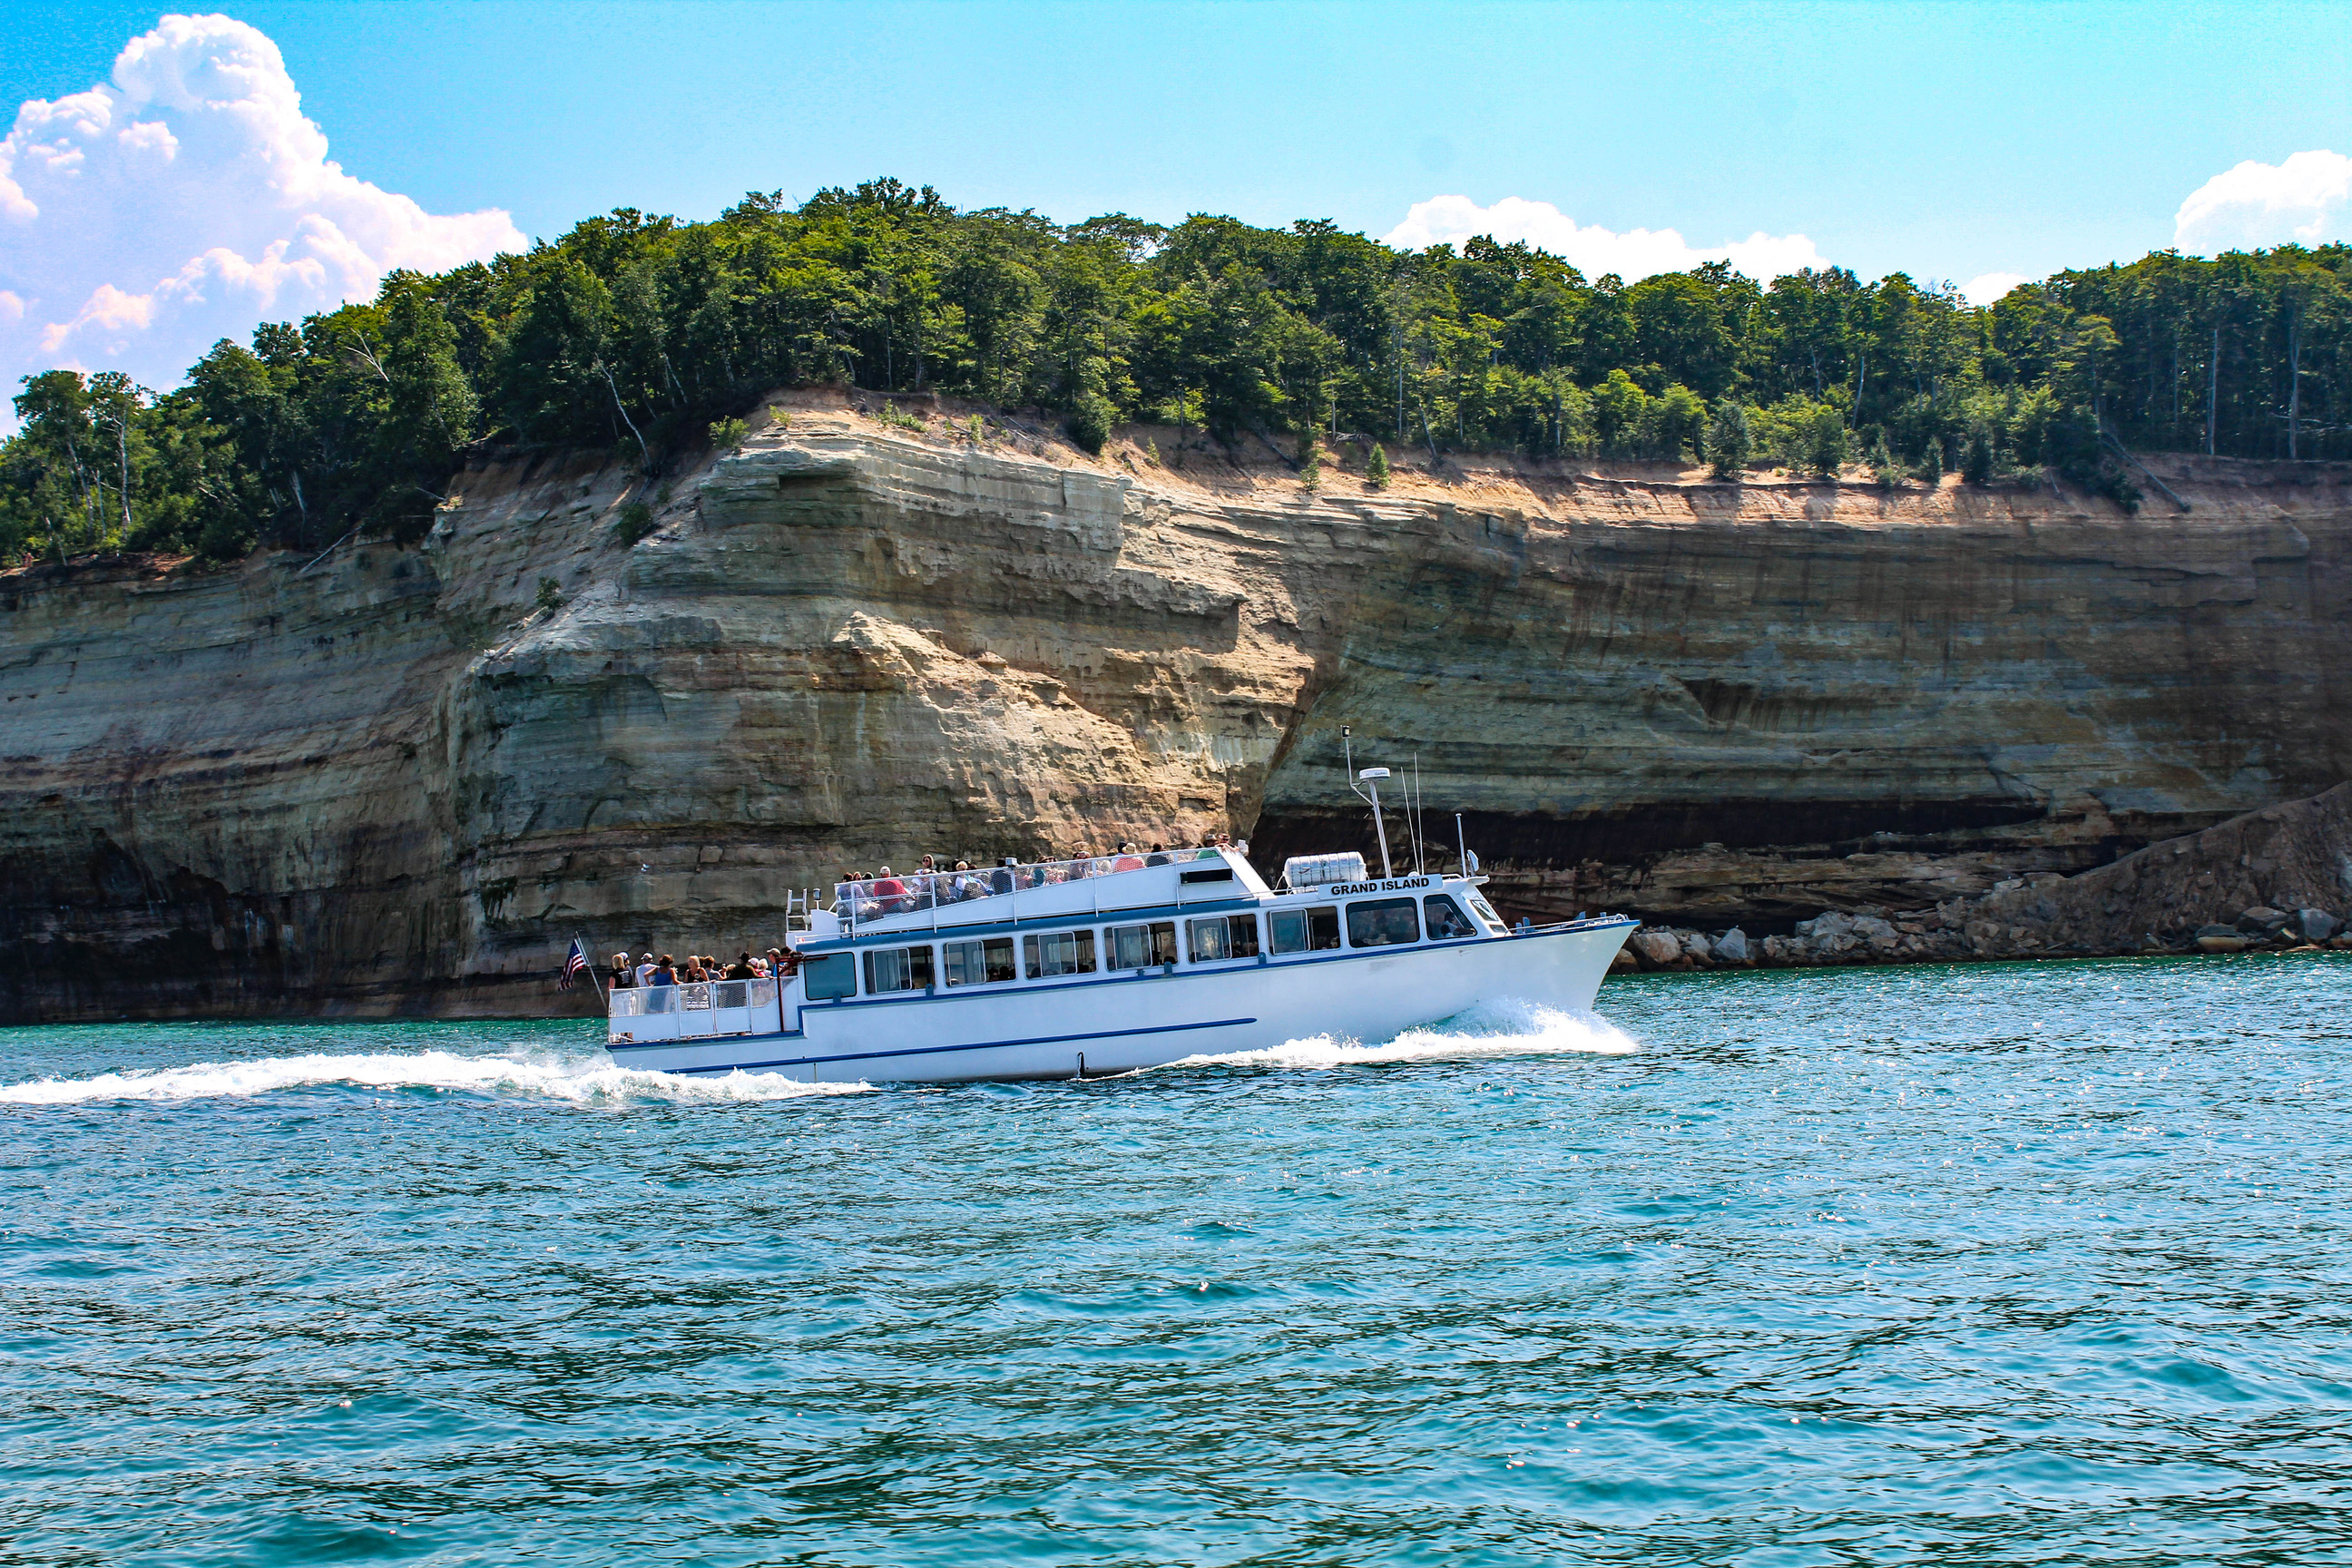 Passenger boat near a long cliff face in a lake